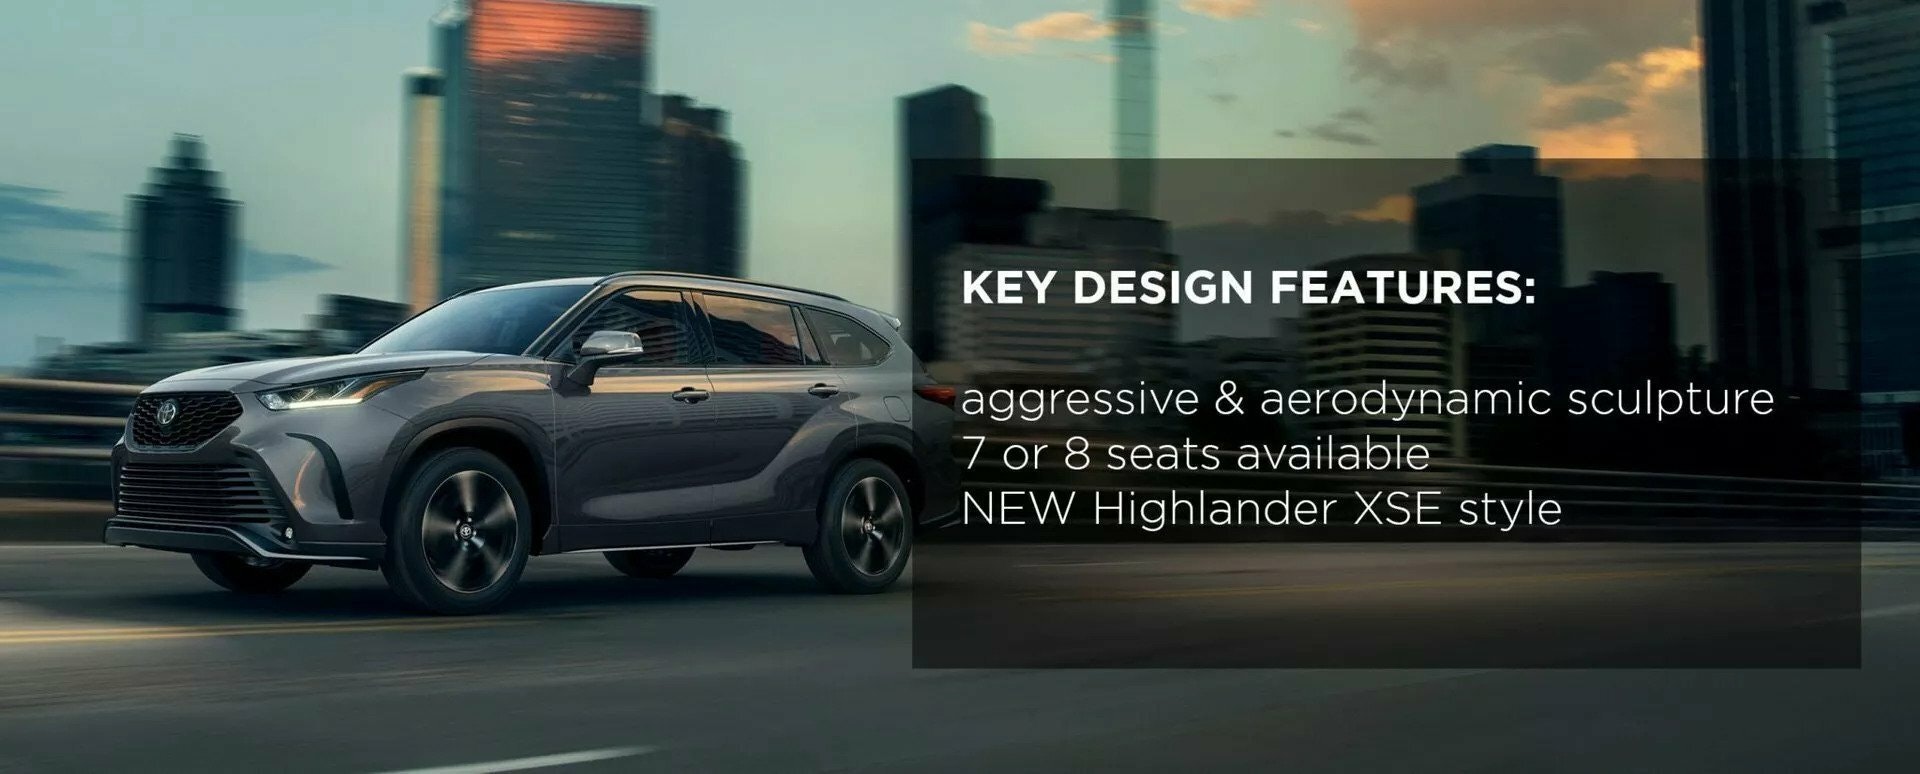 A key design feature of a Toyota Highlander is its aggressive & aerodynamic sculpture